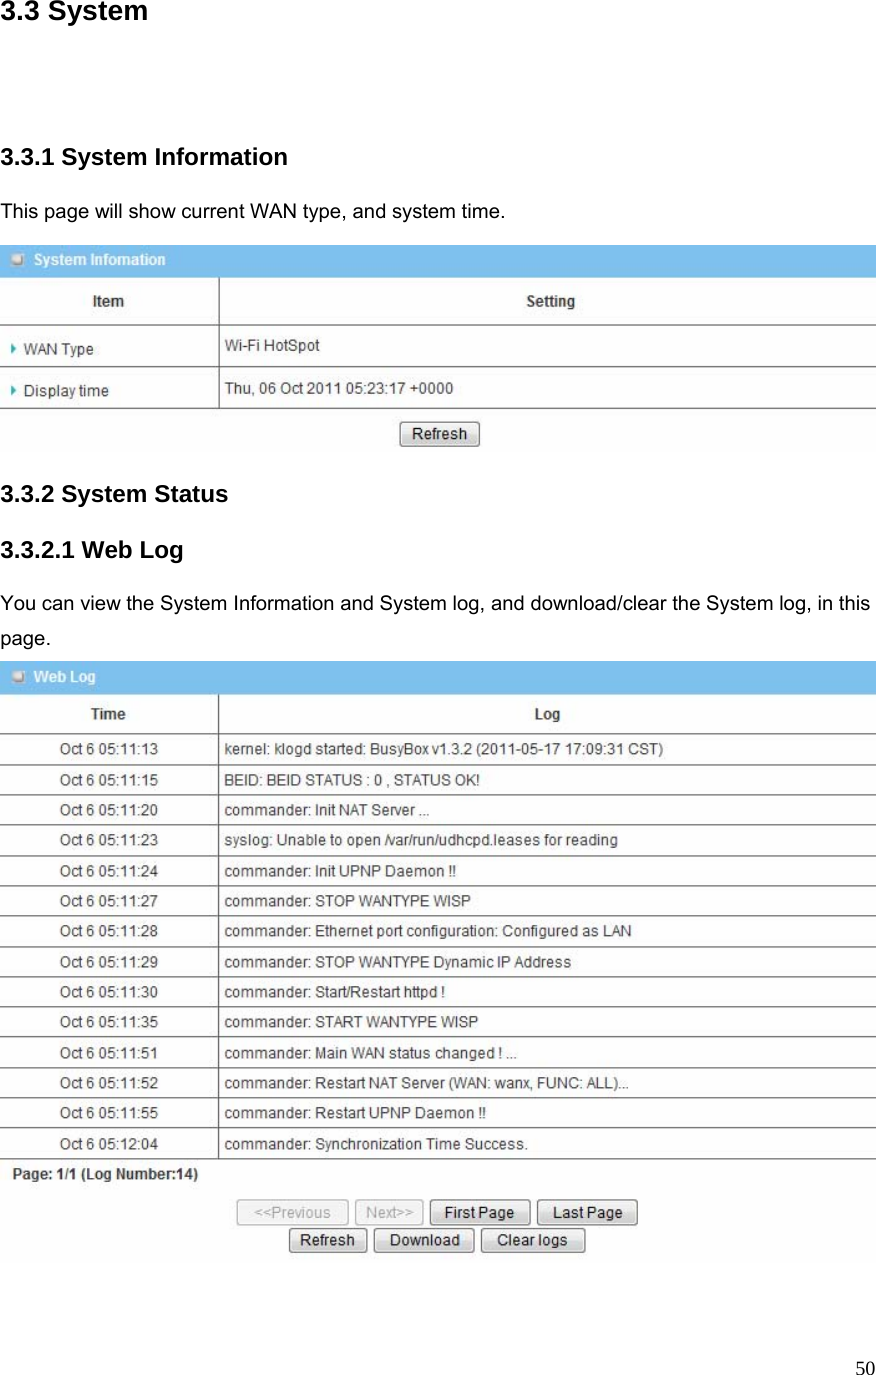  503.3 System      3.3.1 System Information  This page will show current WAN type, and system time.    3.3.2 System Status  3.3.2.1 Web Log  You can view the System Information and System log, and download/clear the System log, in this page.    